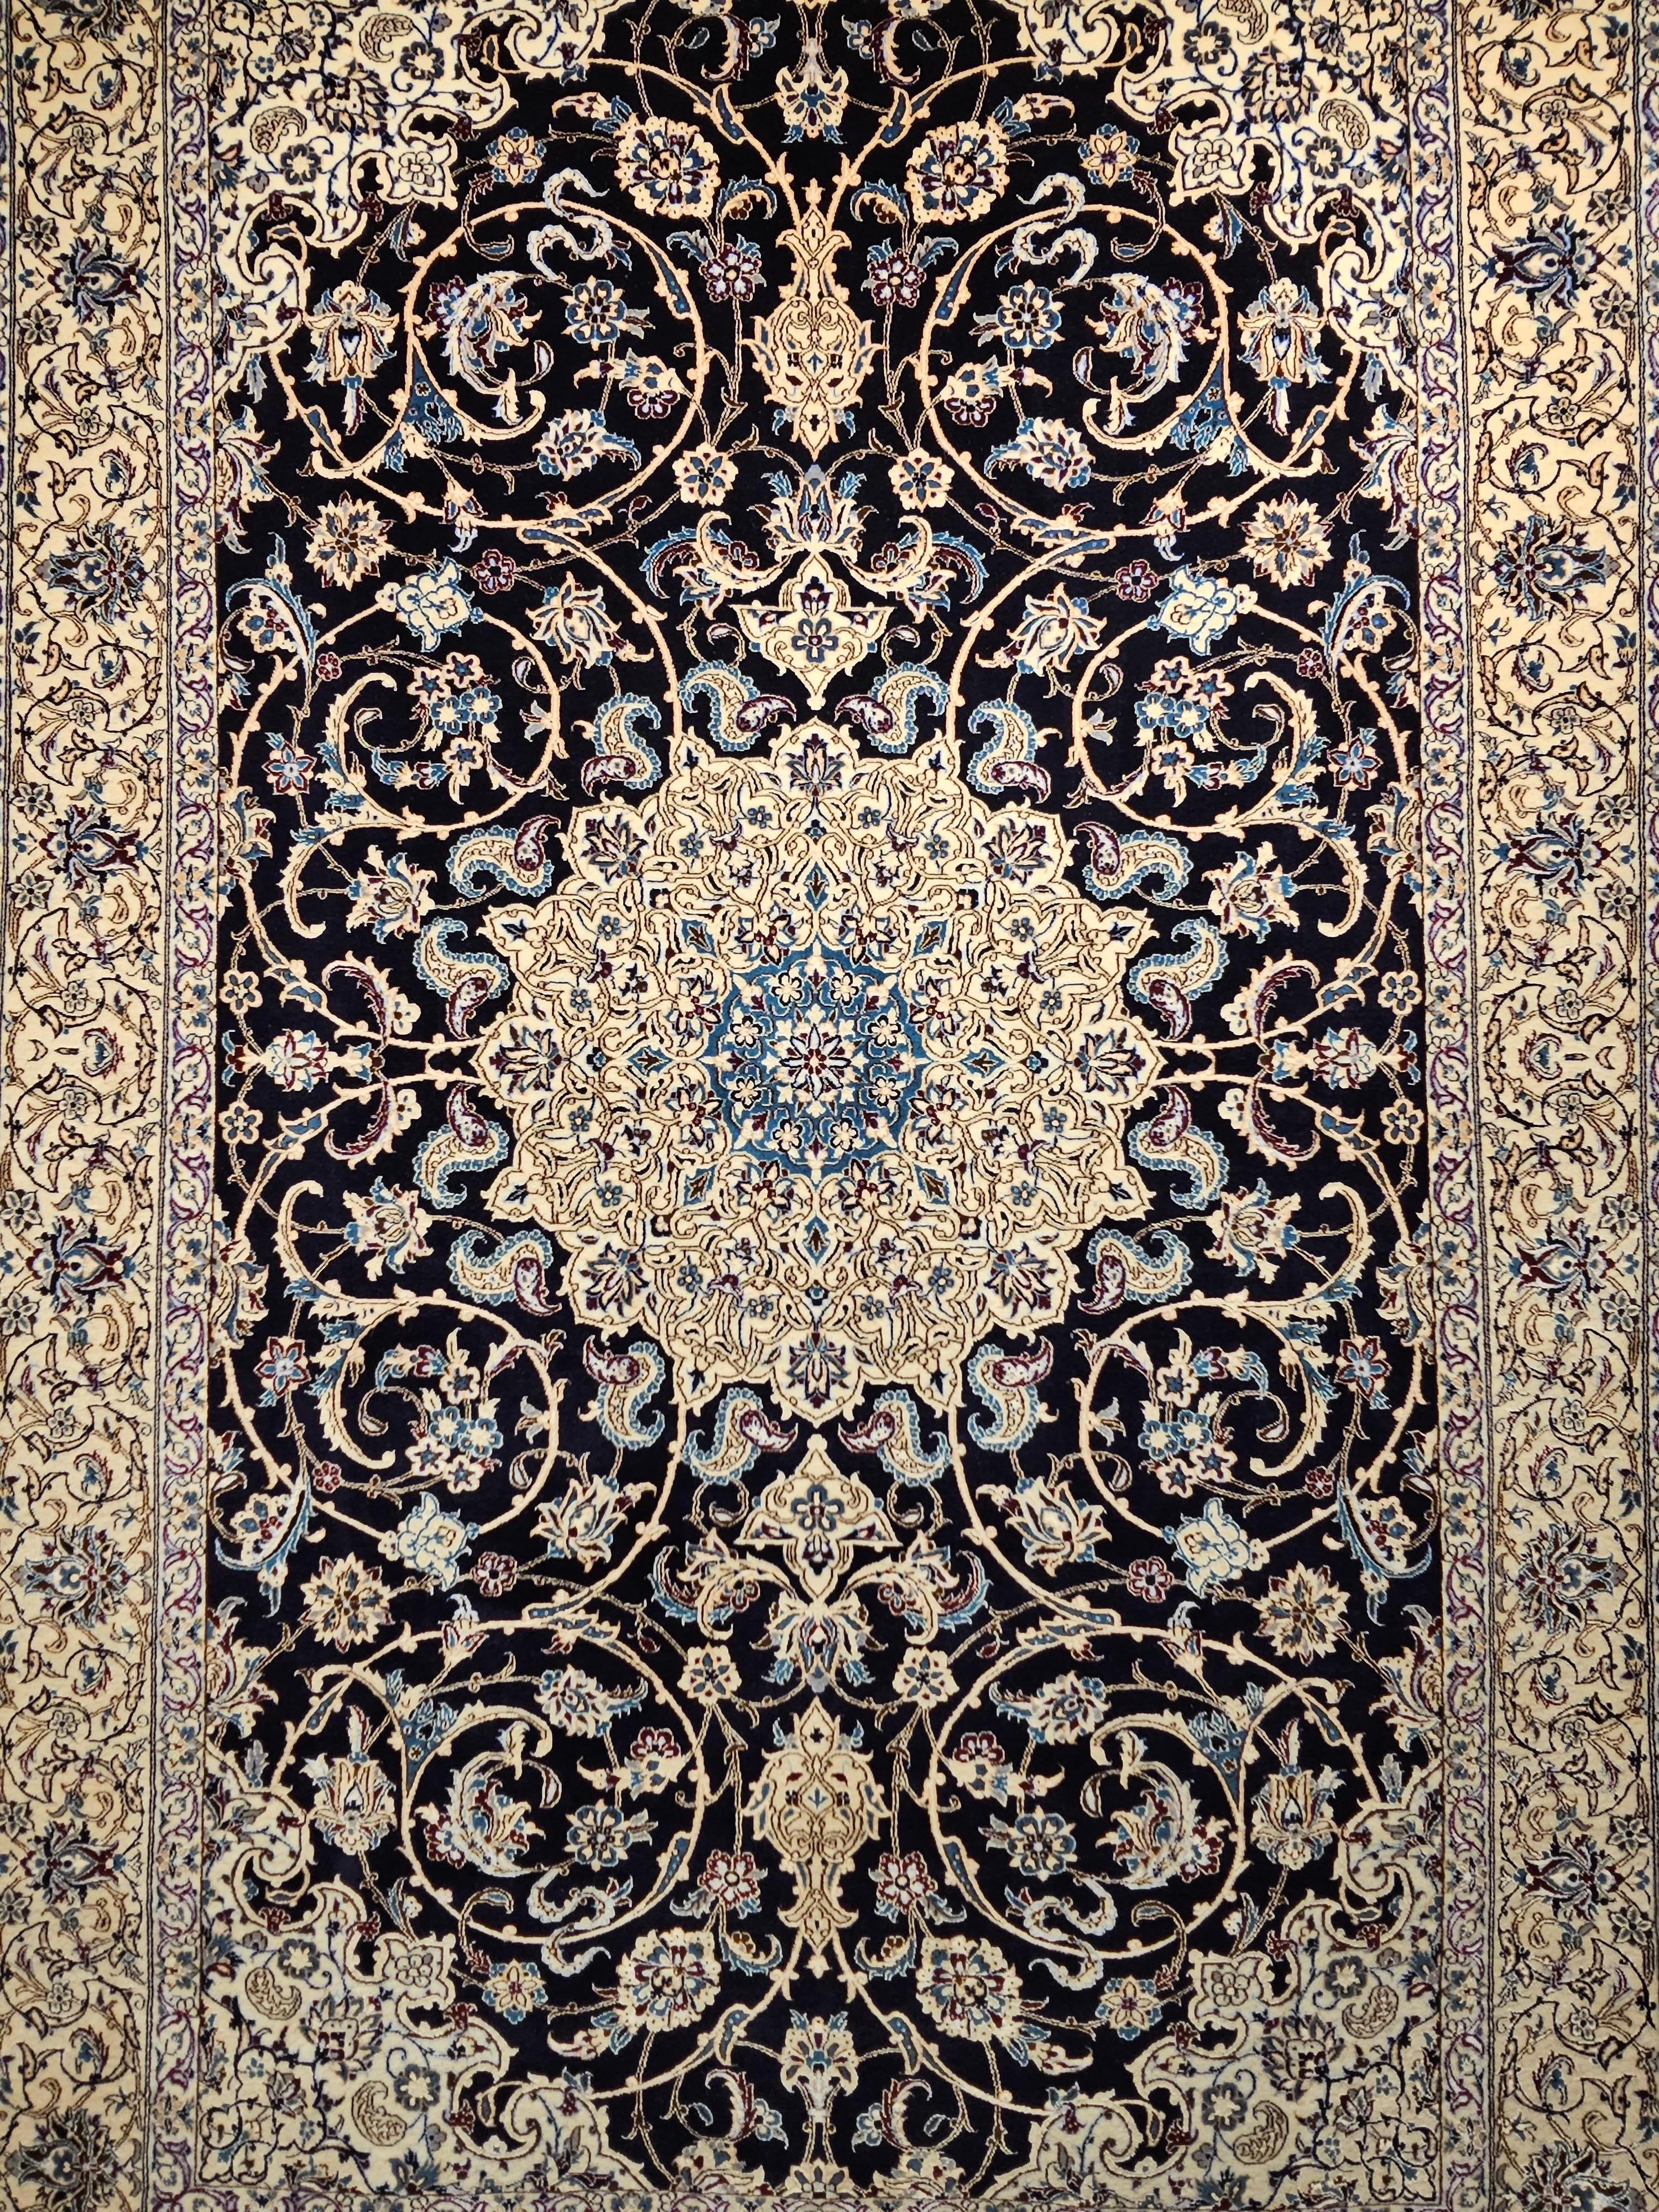  Extra fine weave Persian Nain area rug from the 4th quarter of the 1900s in navy blue, French blue, pale yellow, and ivory colors.   The rug has the signature of the “Habibian” which is considered one of the best rug workshops in the city of Nain. 